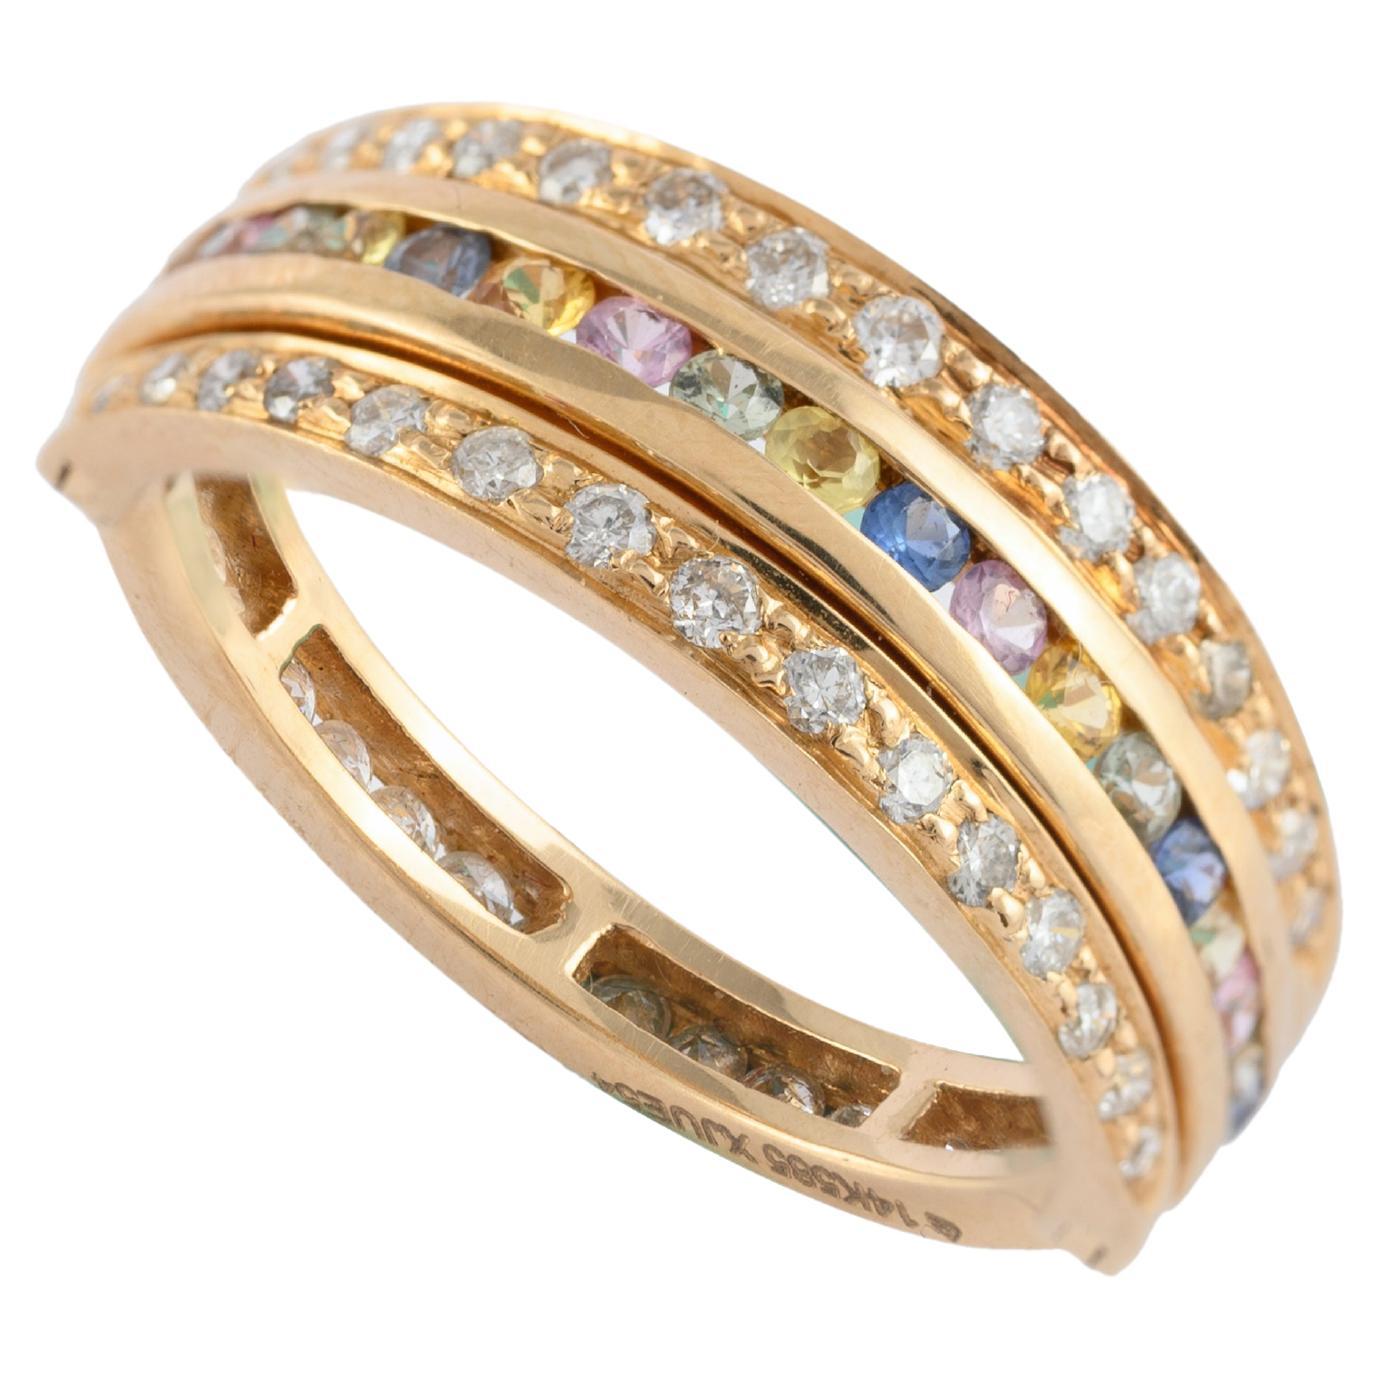 For Sale:  Unique Diamond and Multi Sapphire Spinner Ring in 14k Solid Yellow Gold